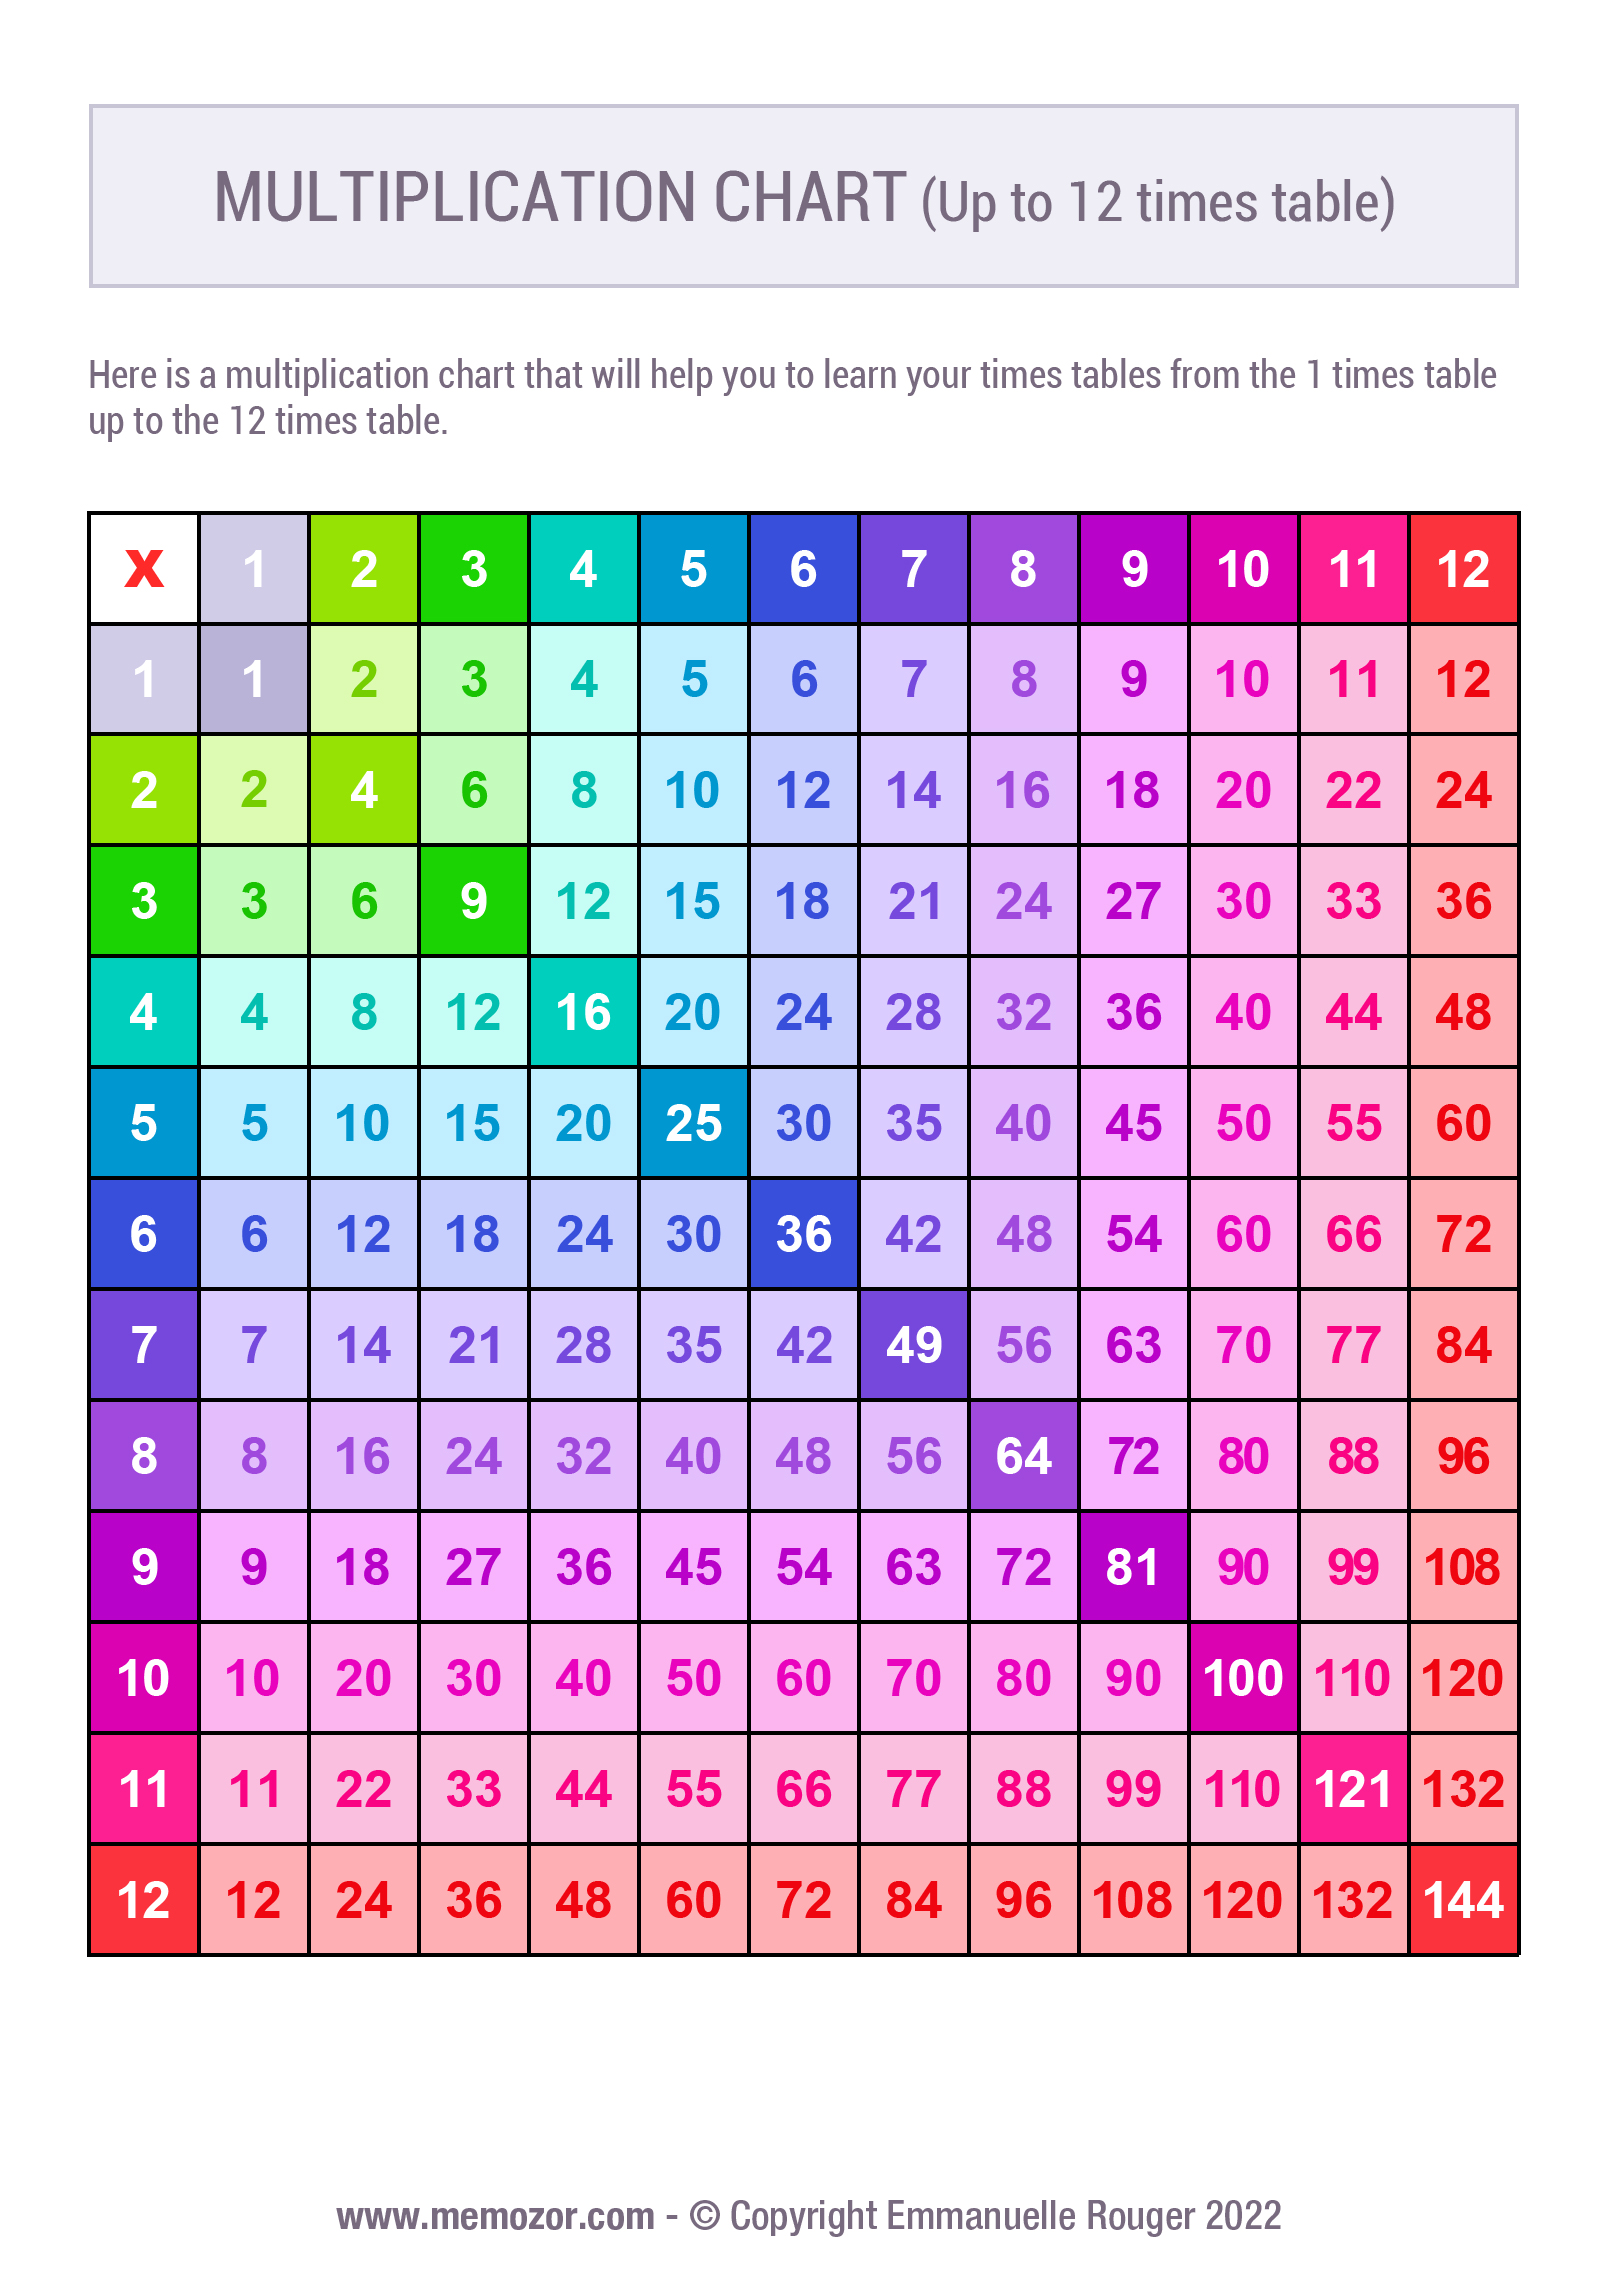 multiplication-table-12-multiplication-chart-multiplication-facts-times-table-print-poster